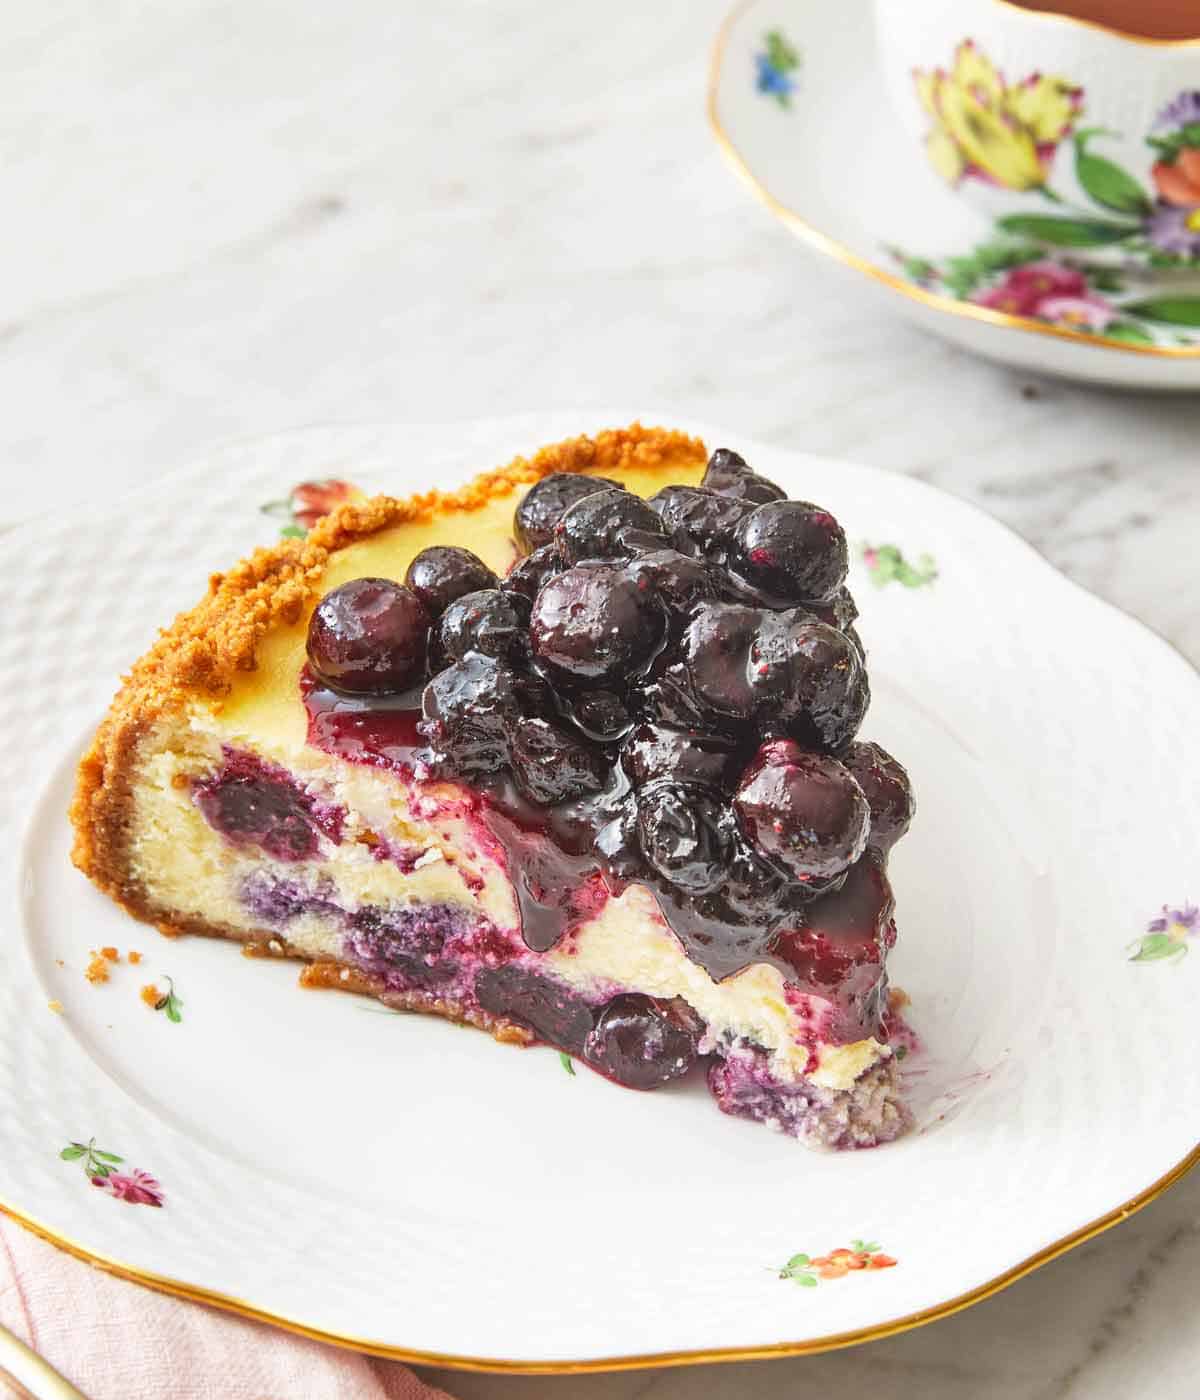 A slice of blueberry cheesecake with blueberry sauce on top, on a plate.